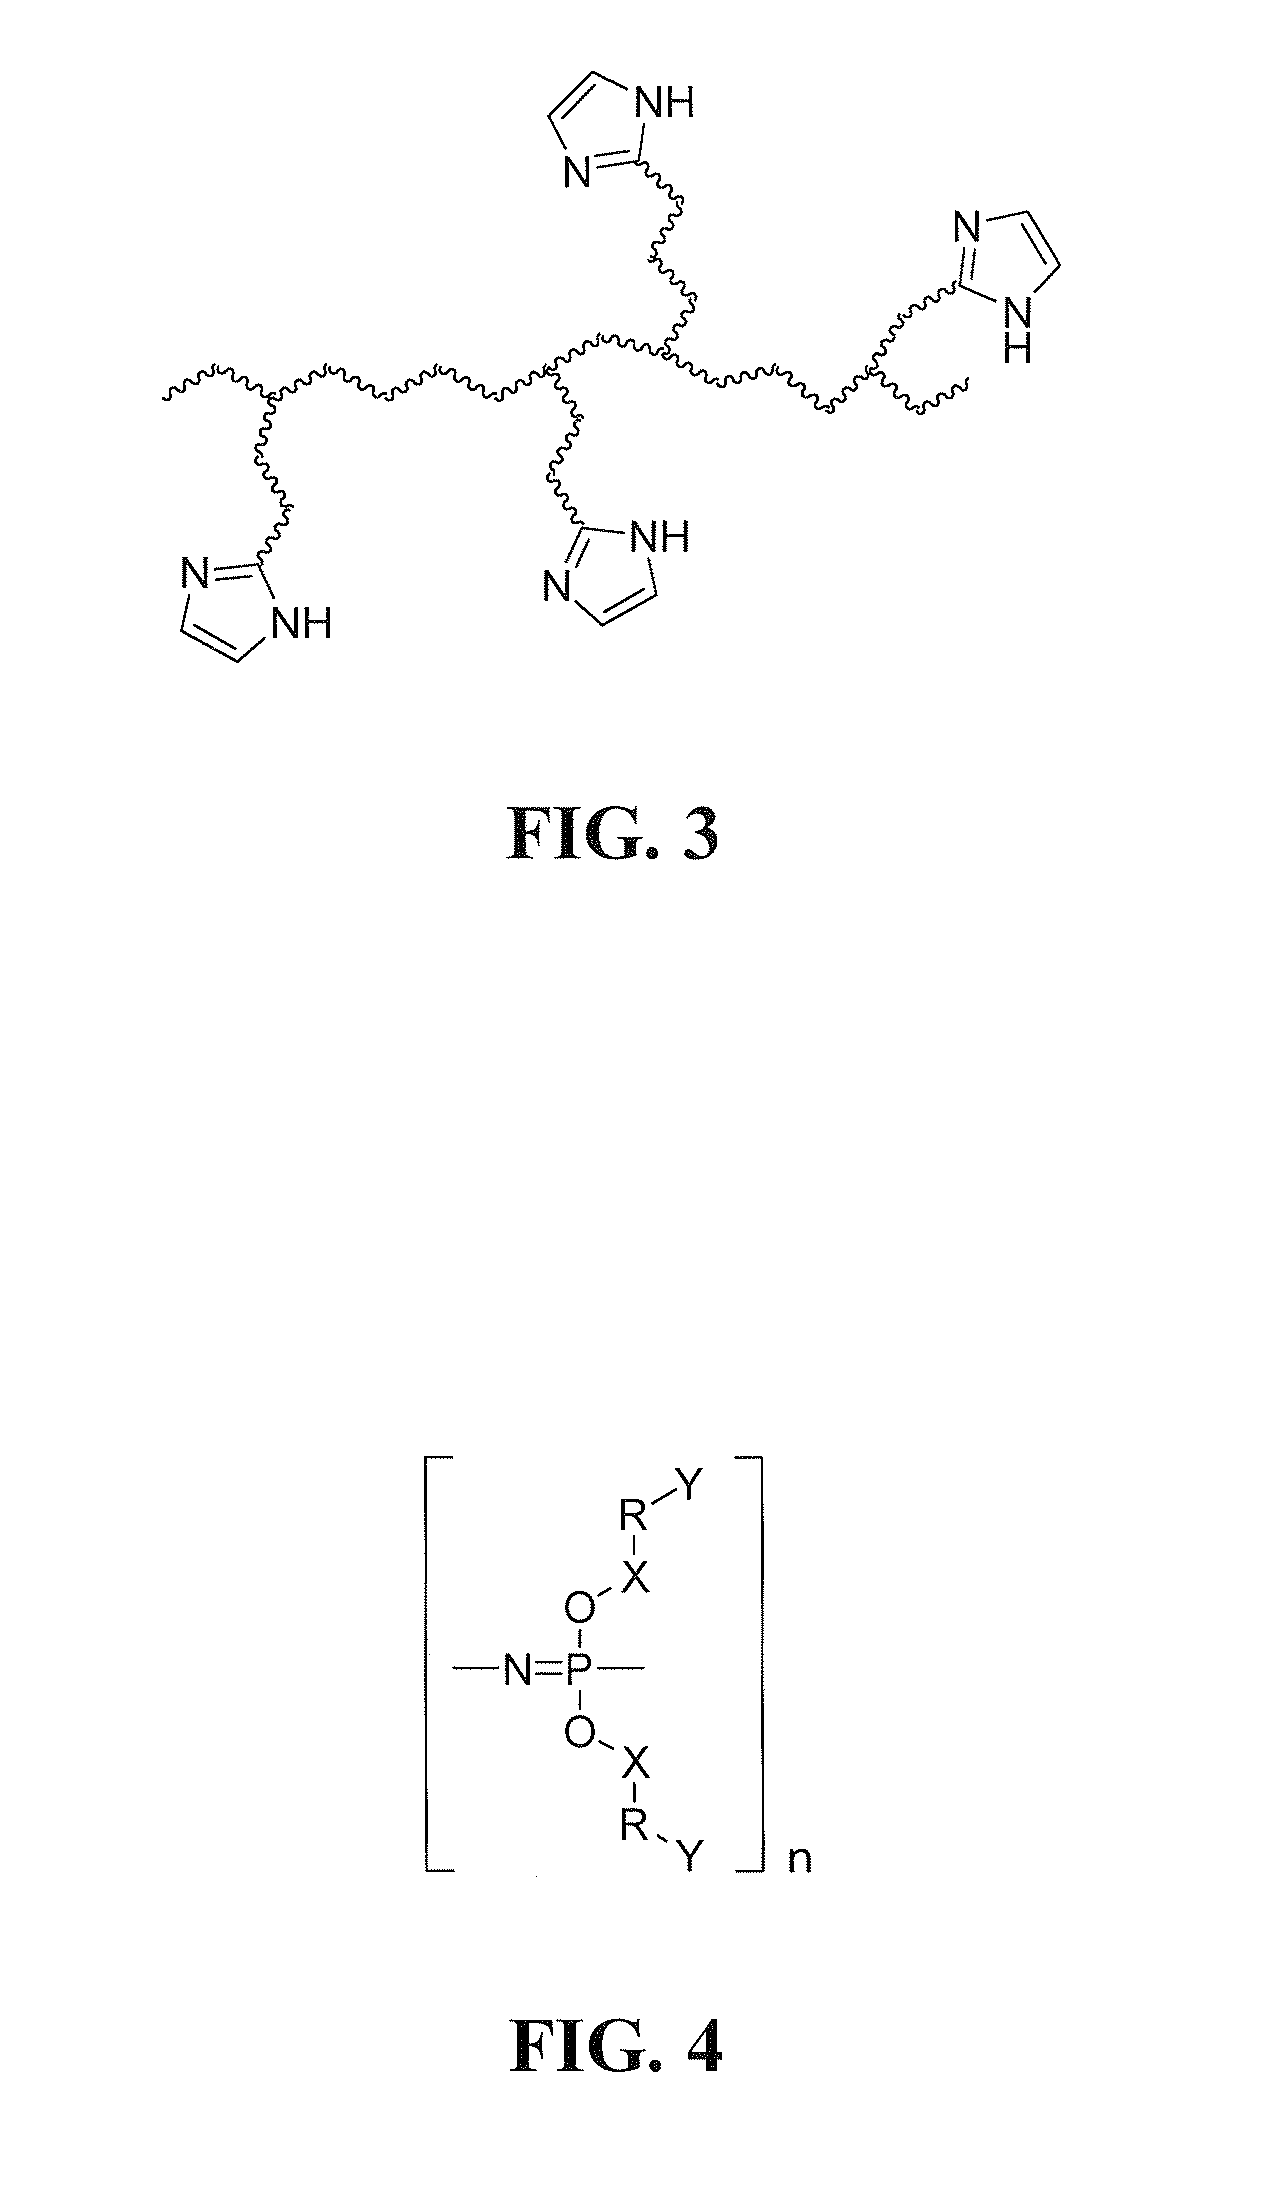 Electrolyte membranes and methods of use